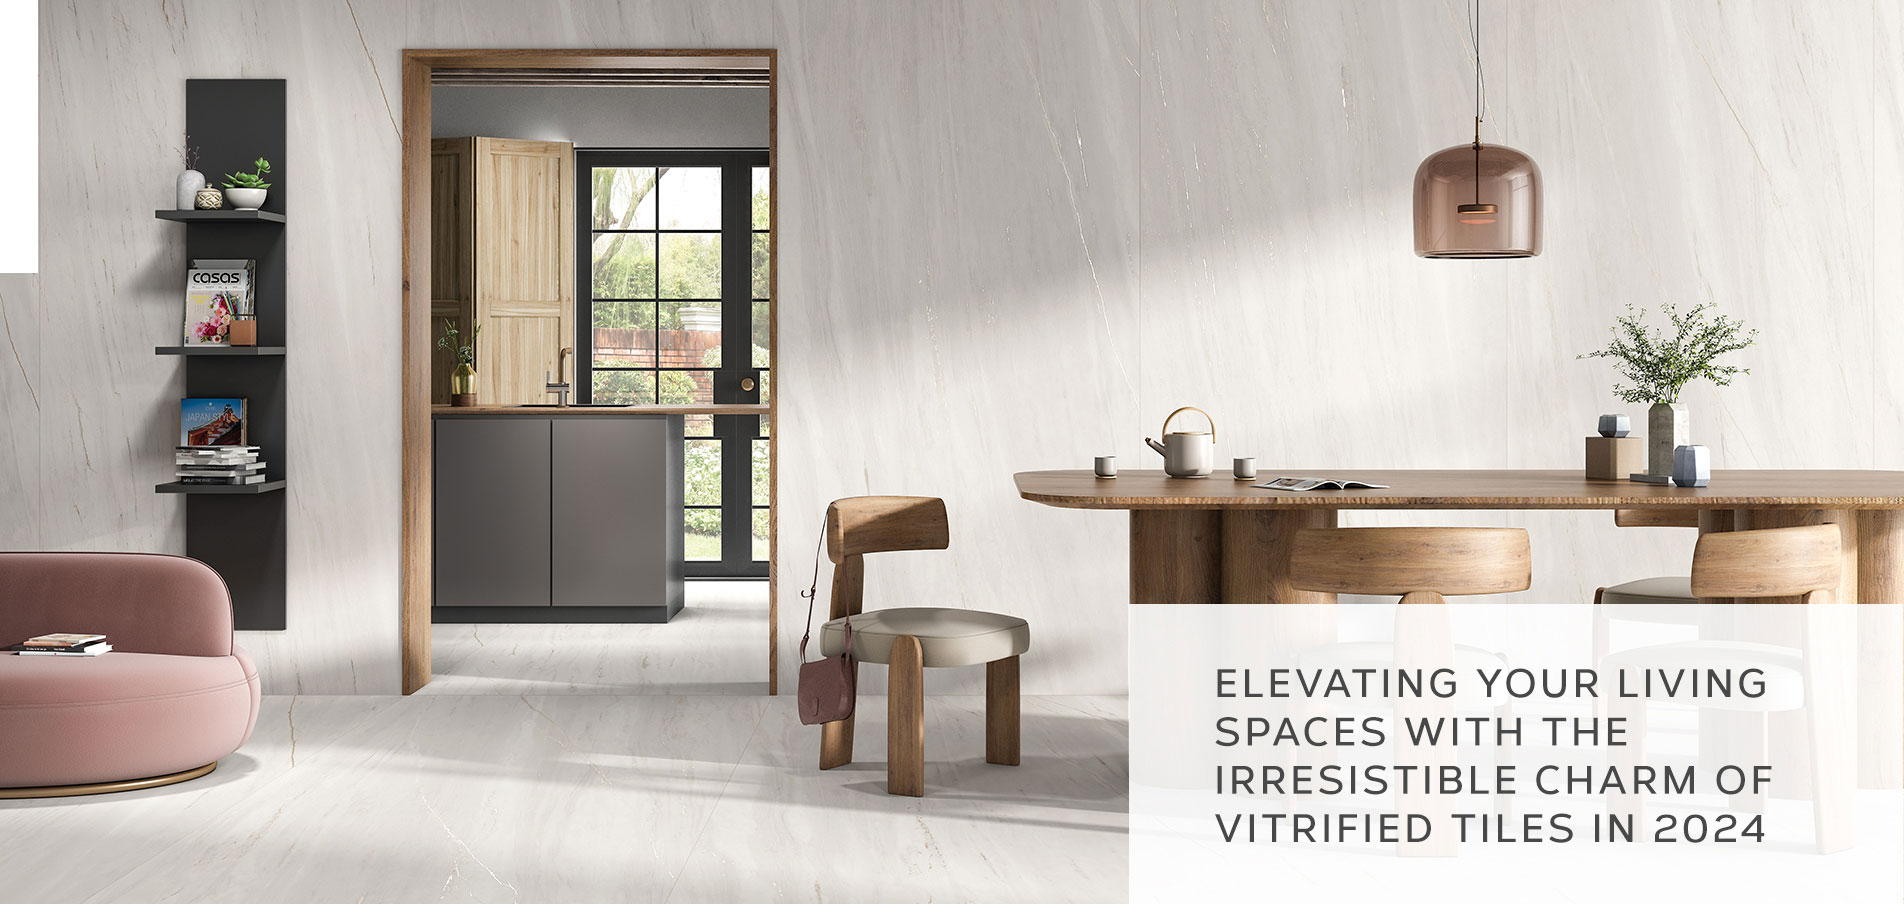 Elevating Your Living Spaces With The Irresistible Charm Of Vitrified Tiles In 2024